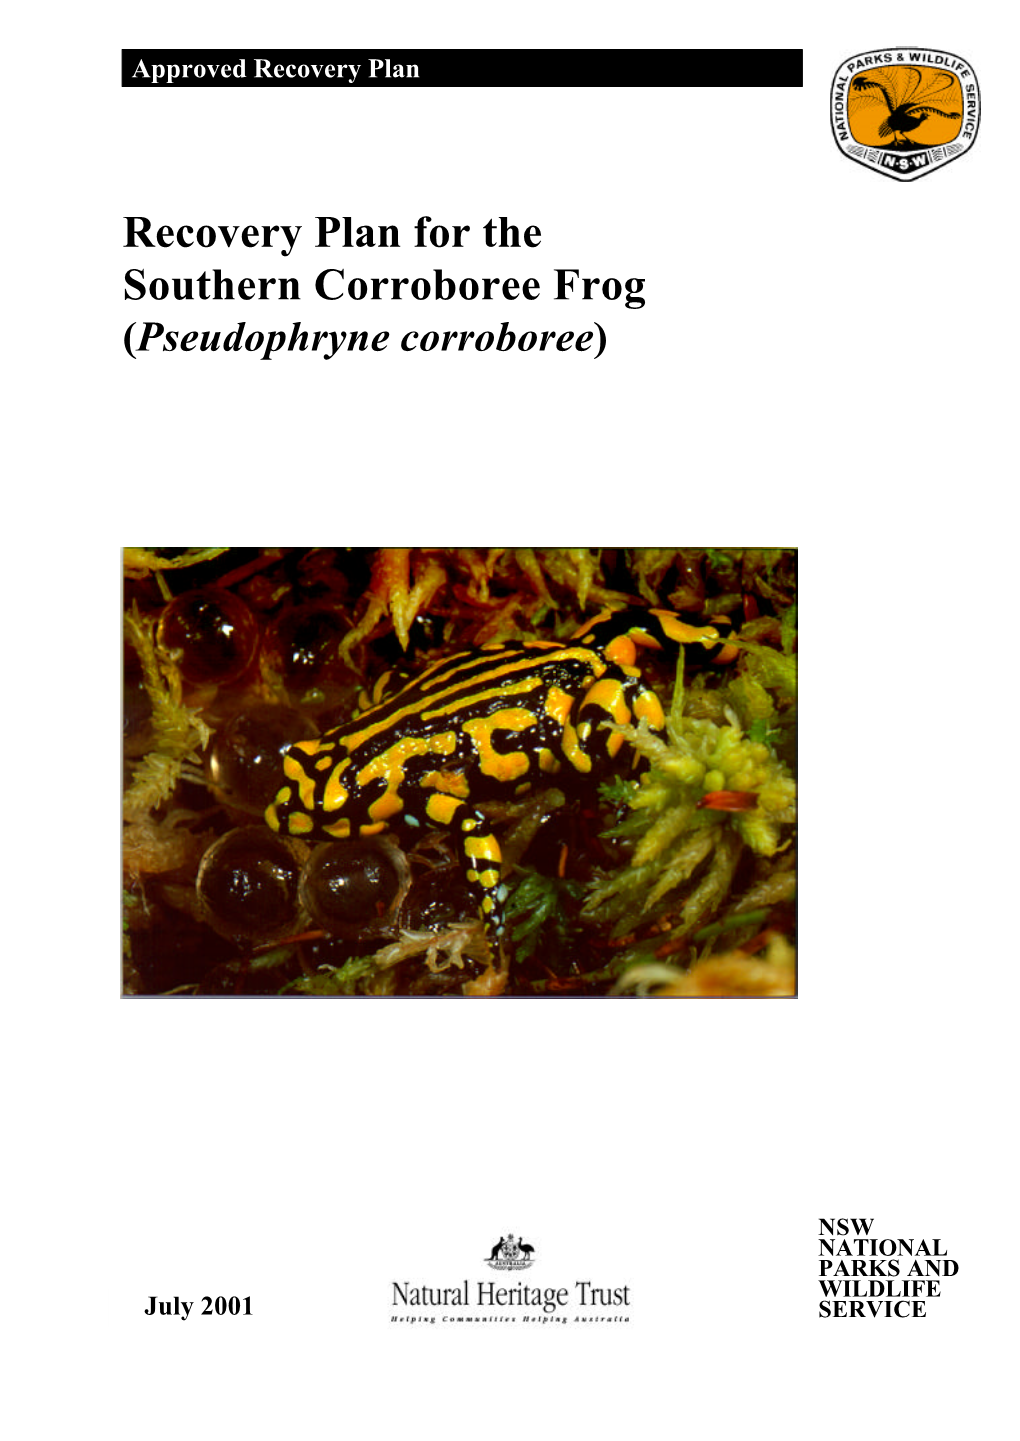 Recovery Plan for the Southern Corroboree Frog (Pseudophryne Corroboree)